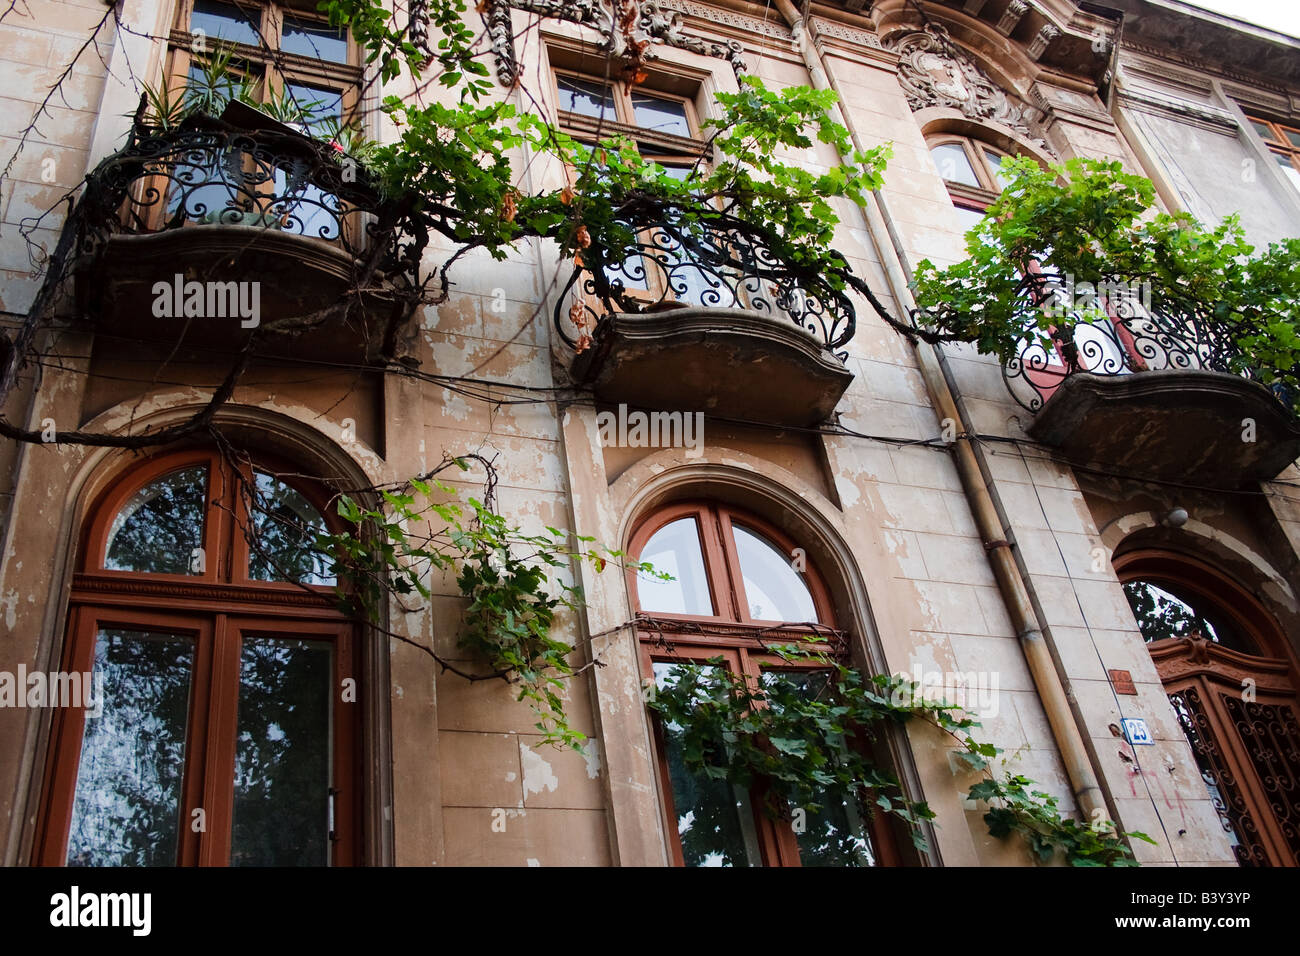 Bucharest Romania Baroque style residence on Bulevardul Magheru showing swirling ironwork and vines balcony detail Stock Photo